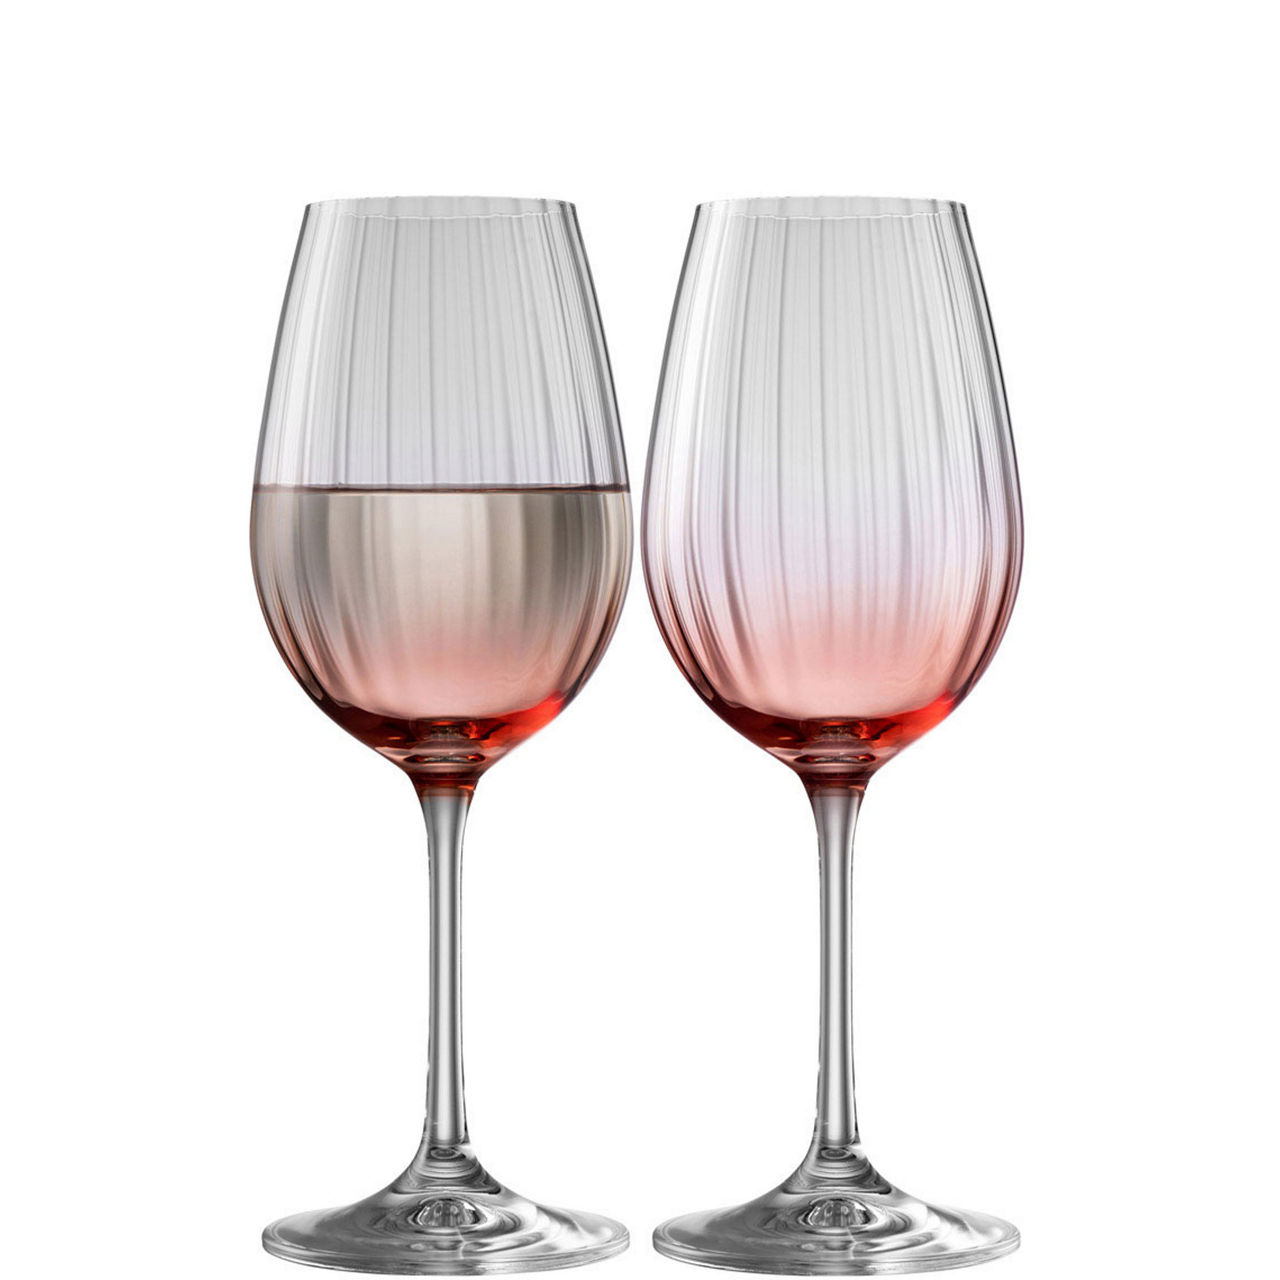 Galway Crystal Irish Crystal Brandy Glass Pair Gifts For Home Tableware at  Irish on Grand